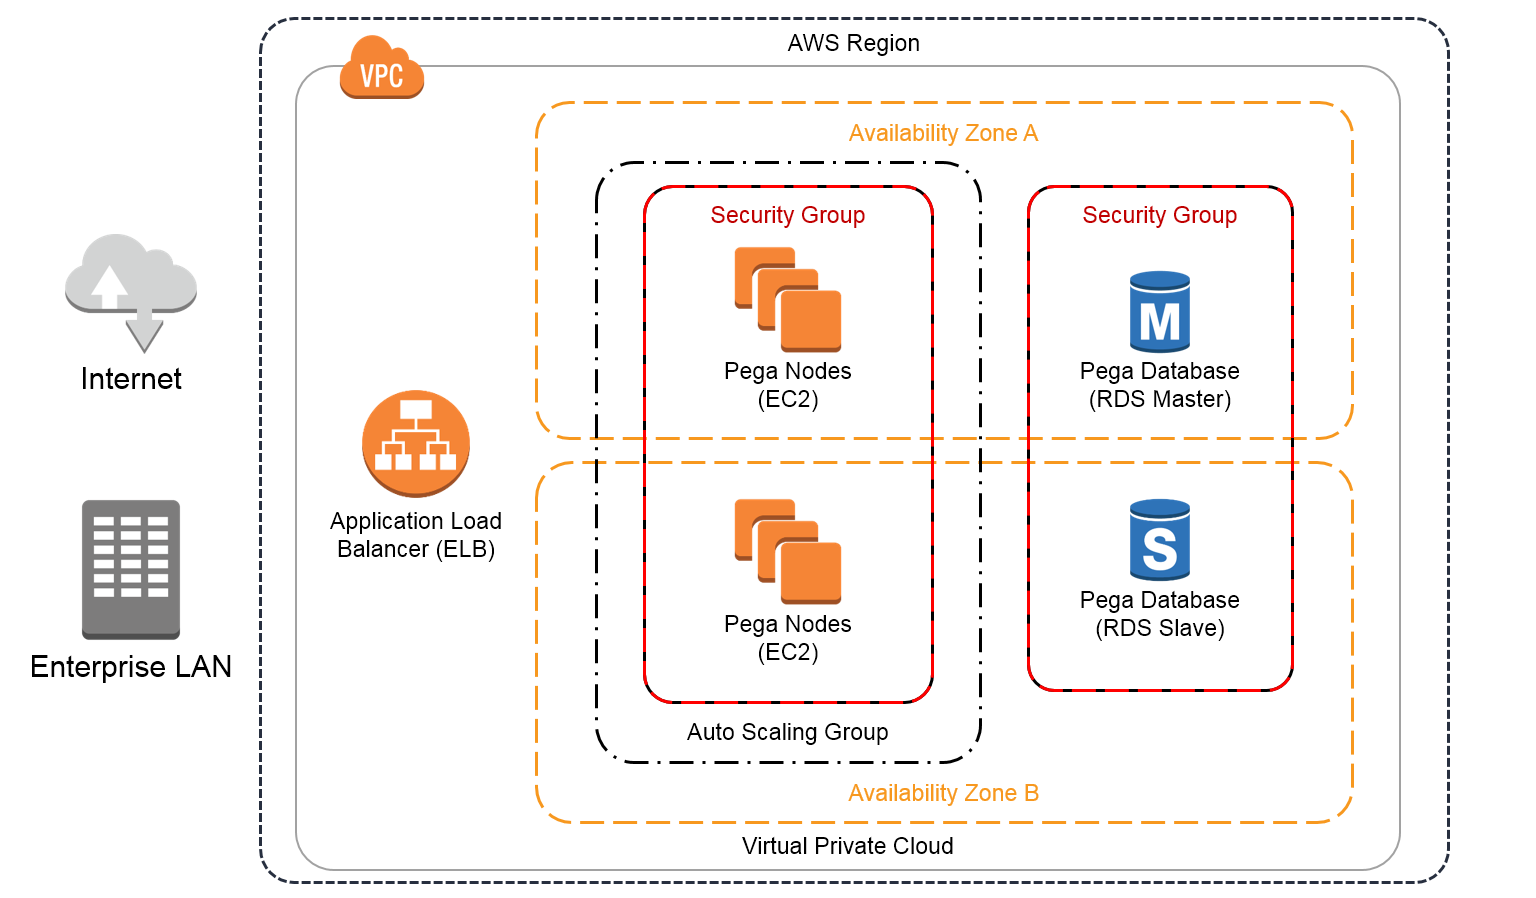 The Shared Development environment has additional EC2 instances and Amazon RDS instances and uses the AWS ELB for load-balancing.